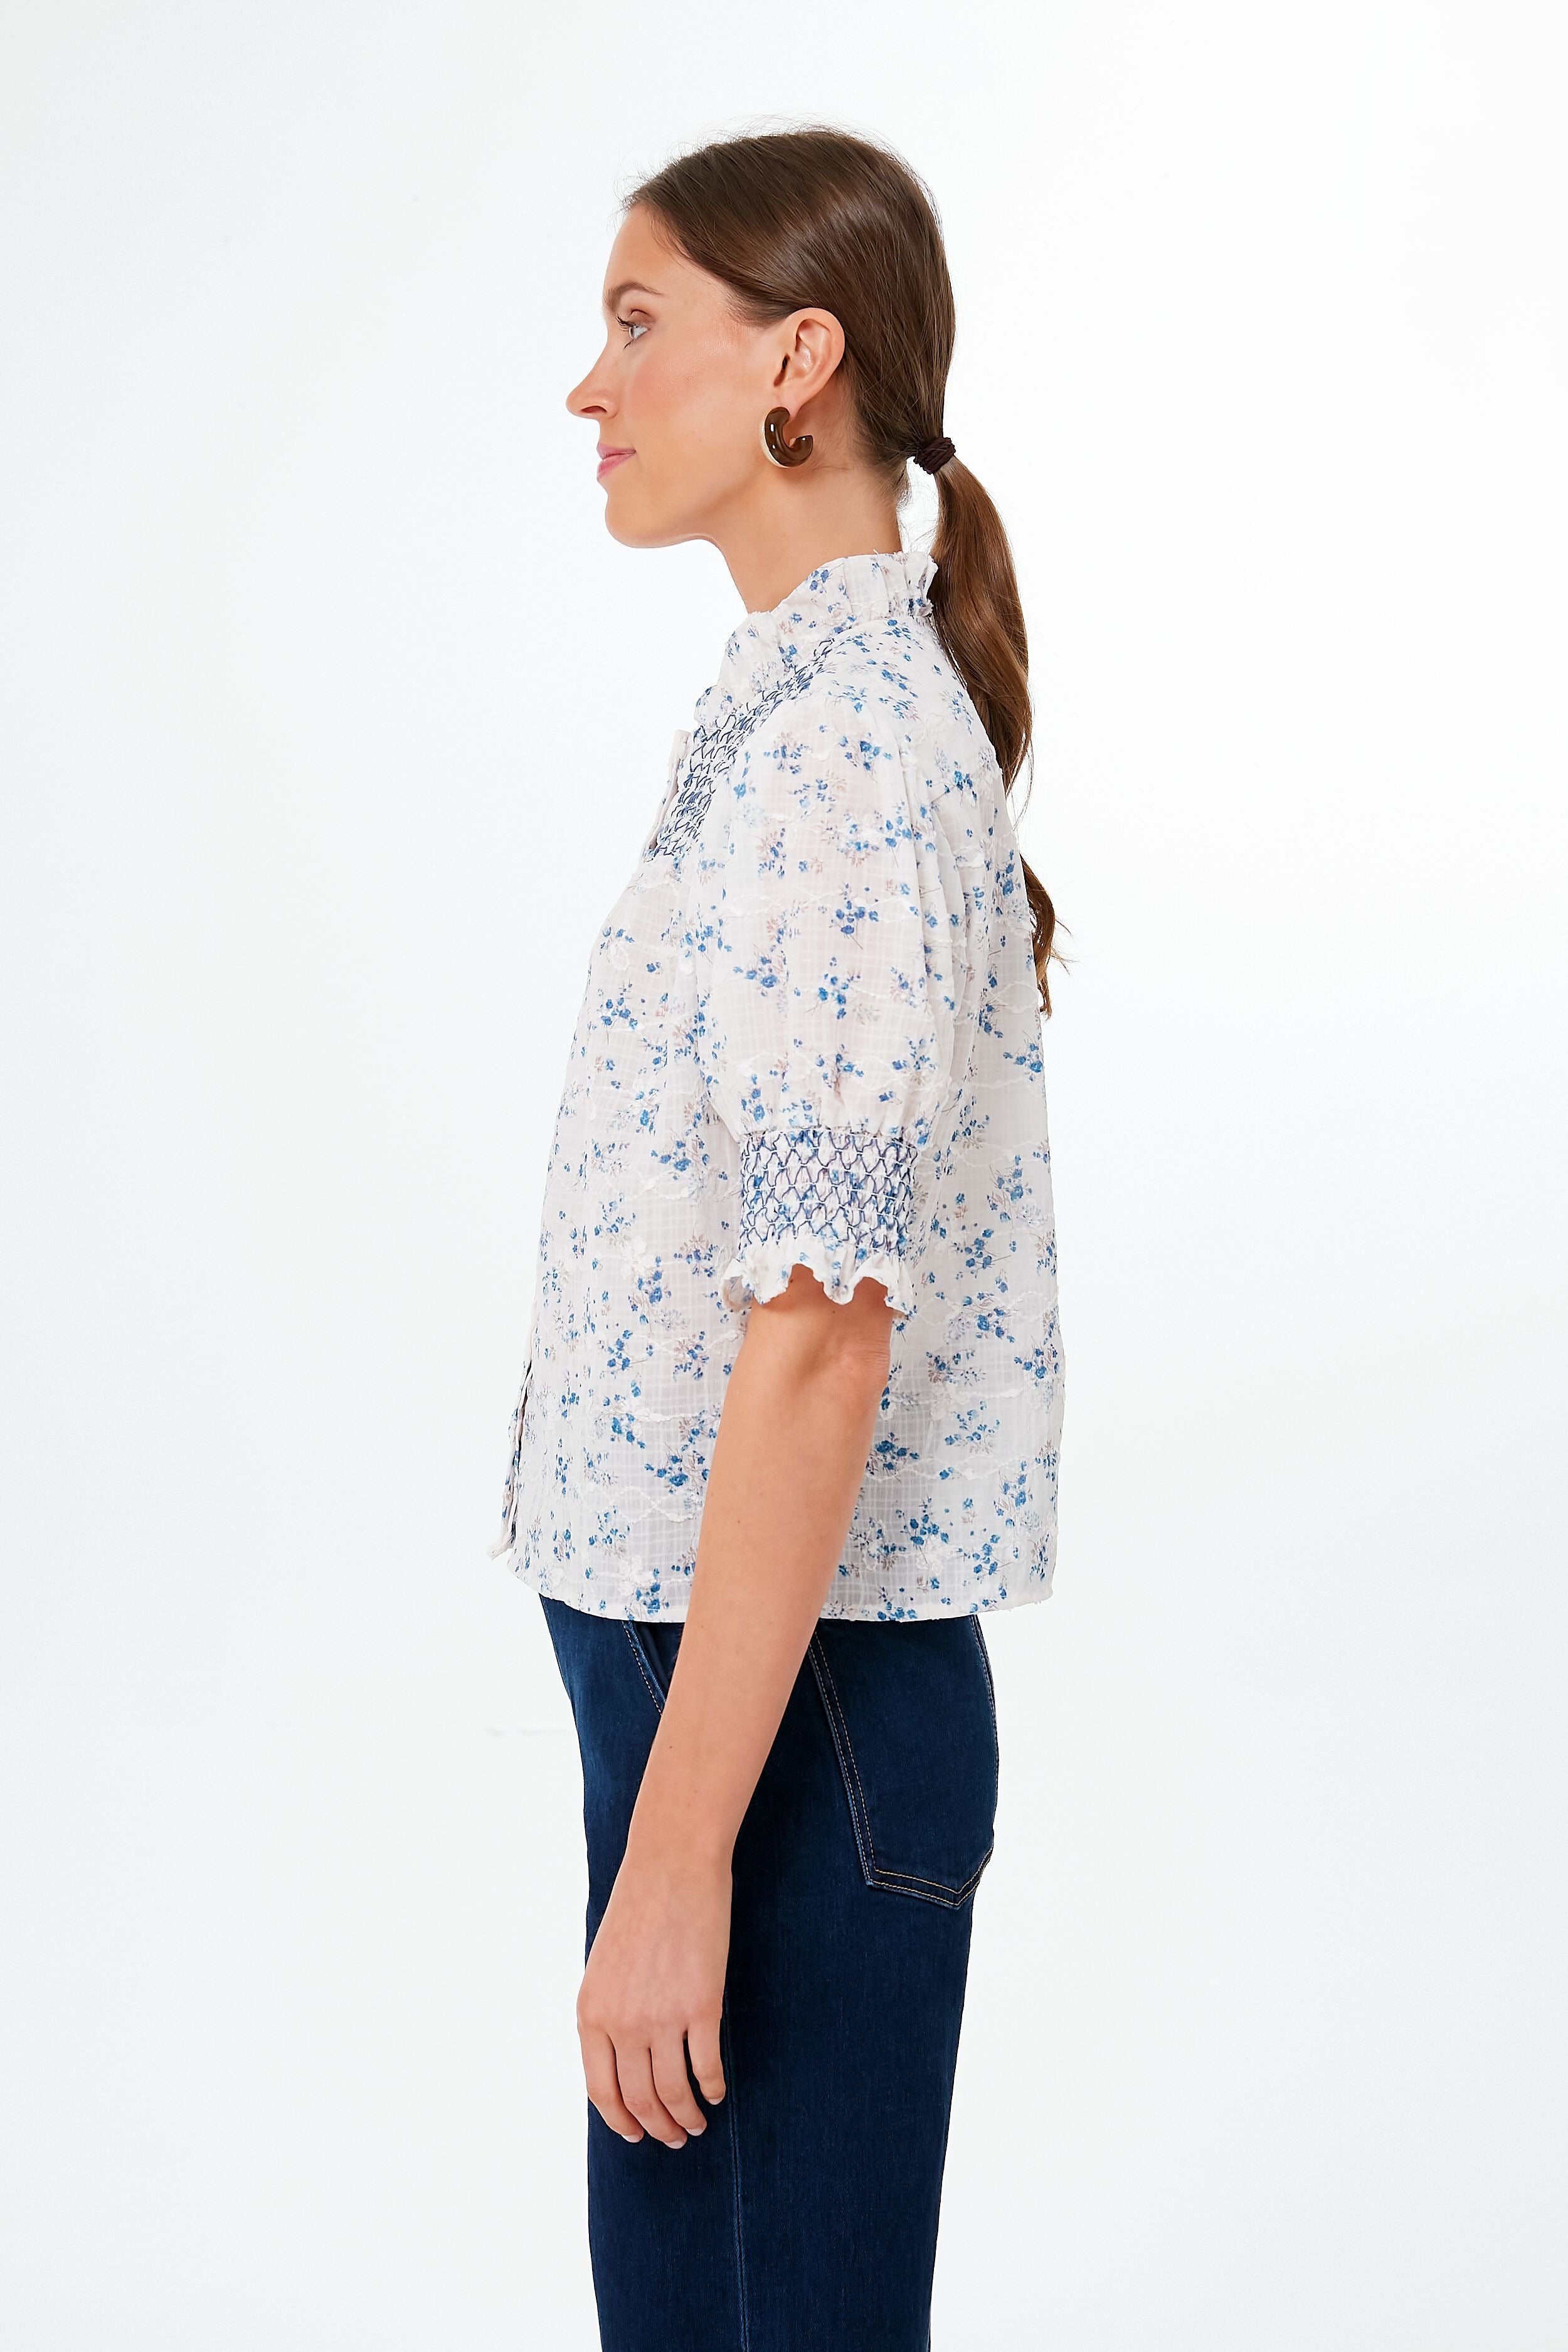 The Shirt - The Signature Shirt in Denim, Women's Size XXL - No Gape Technology for The Perfect Fit